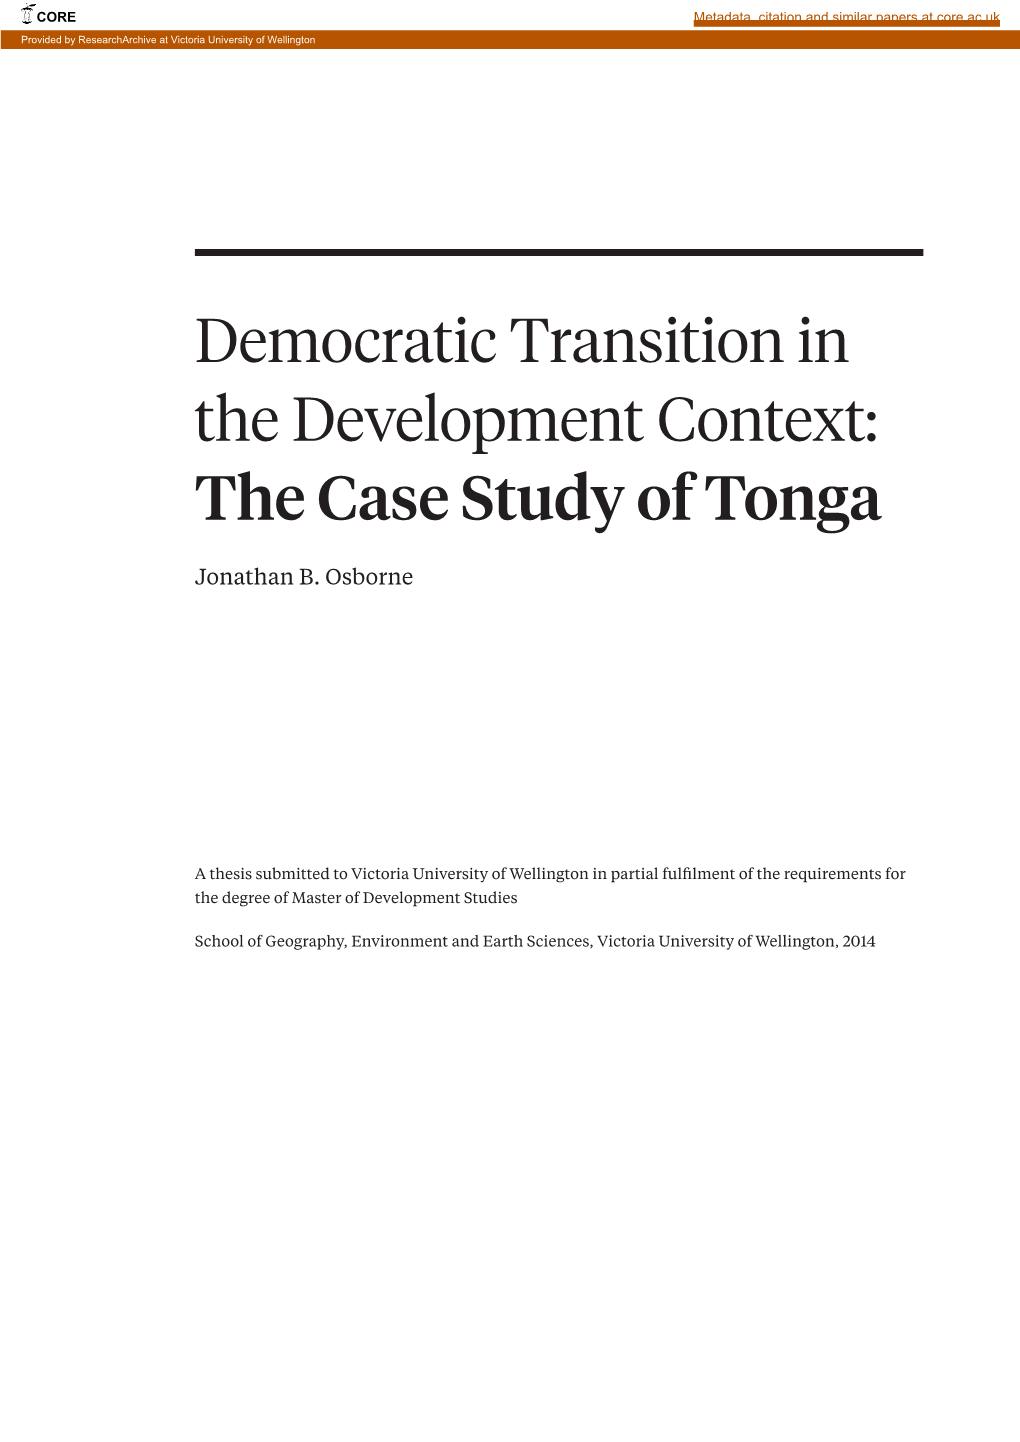 Democratic Transition in the Development Context: the Case Study of Tonga